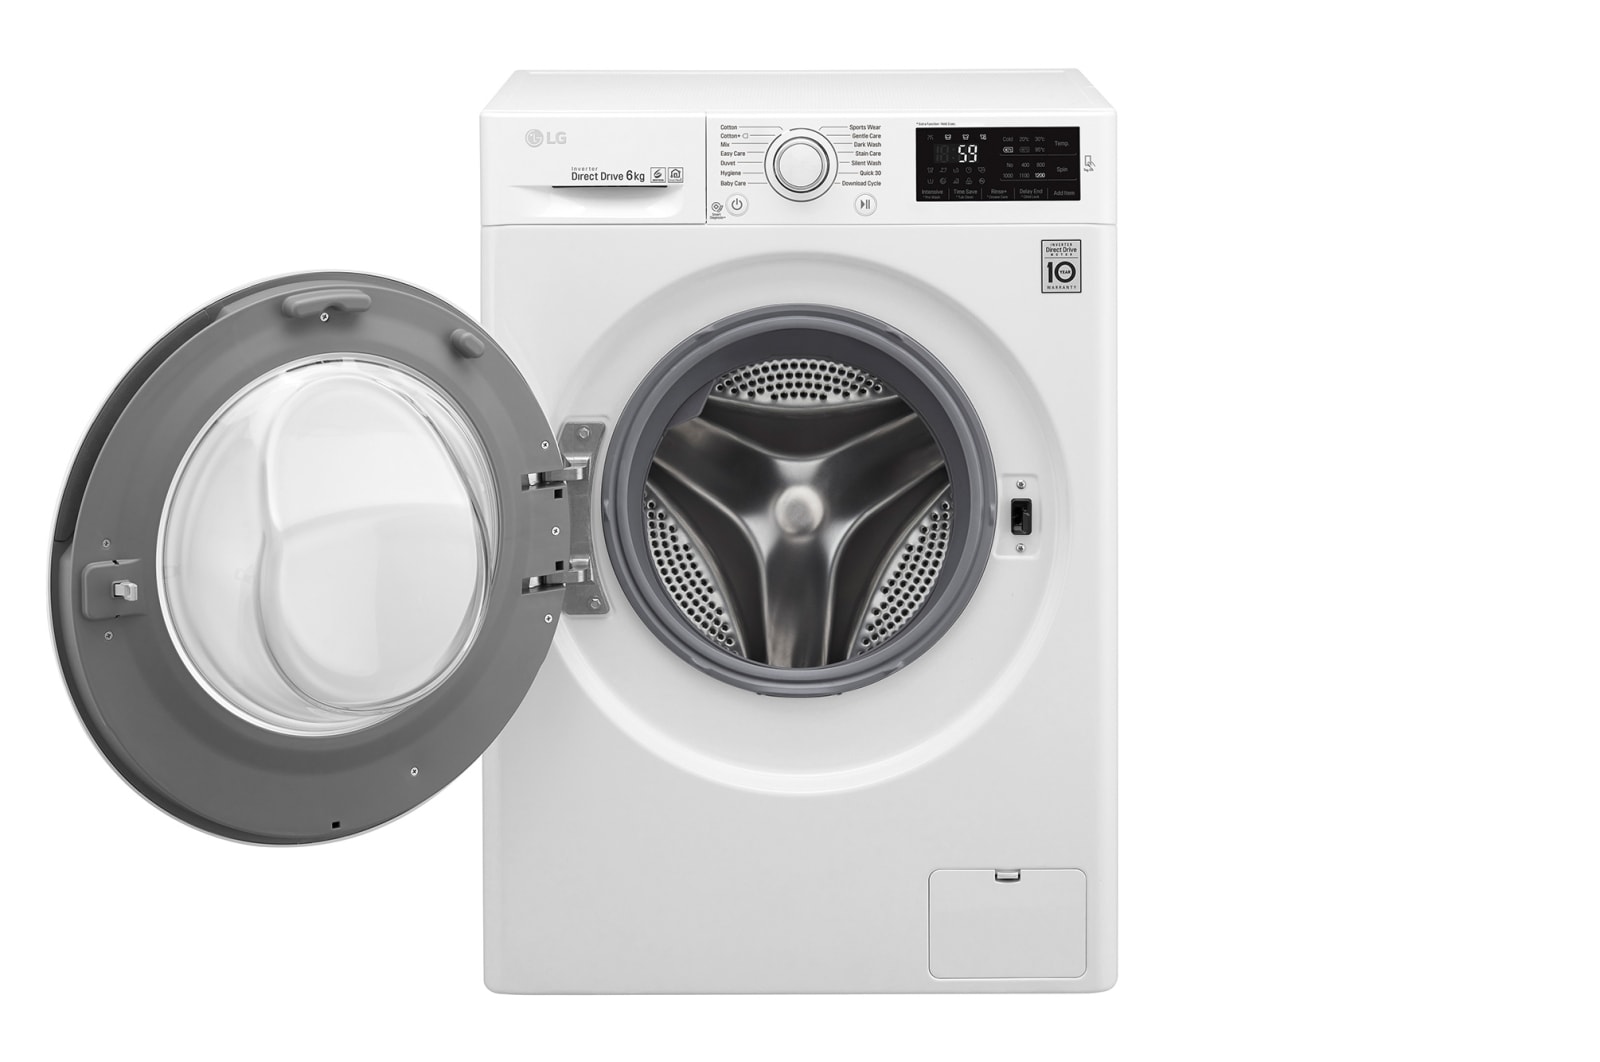 Your washing machine could be sending 3.7 GB of data a day — LG